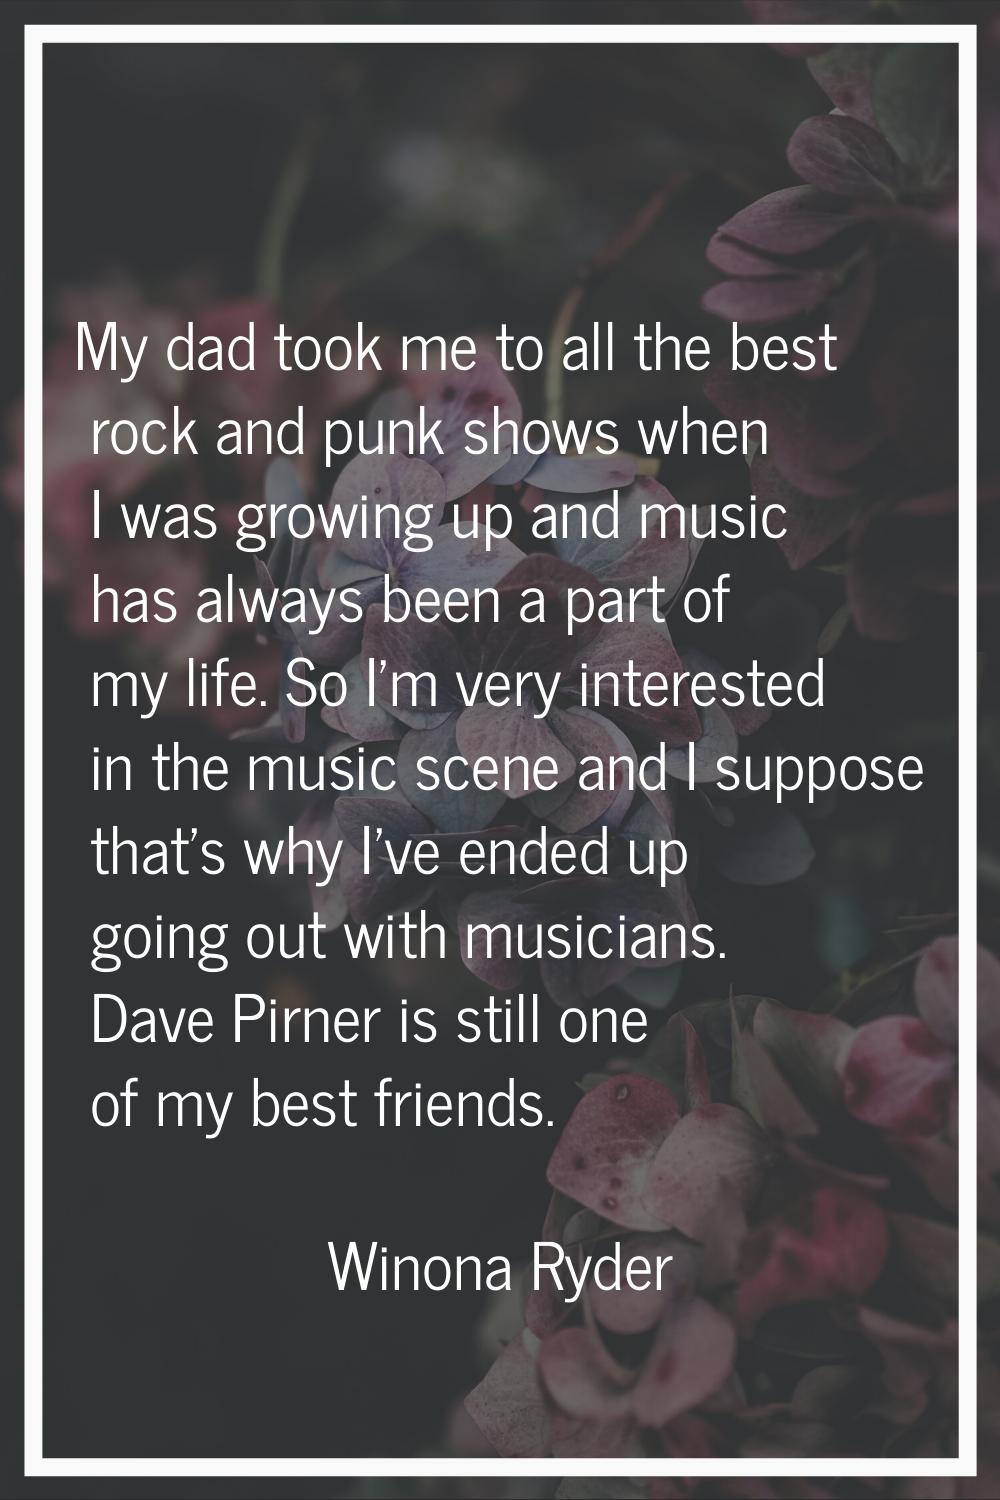 My dad took me to all the best rock and punk shows when I was growing up and music has always been 